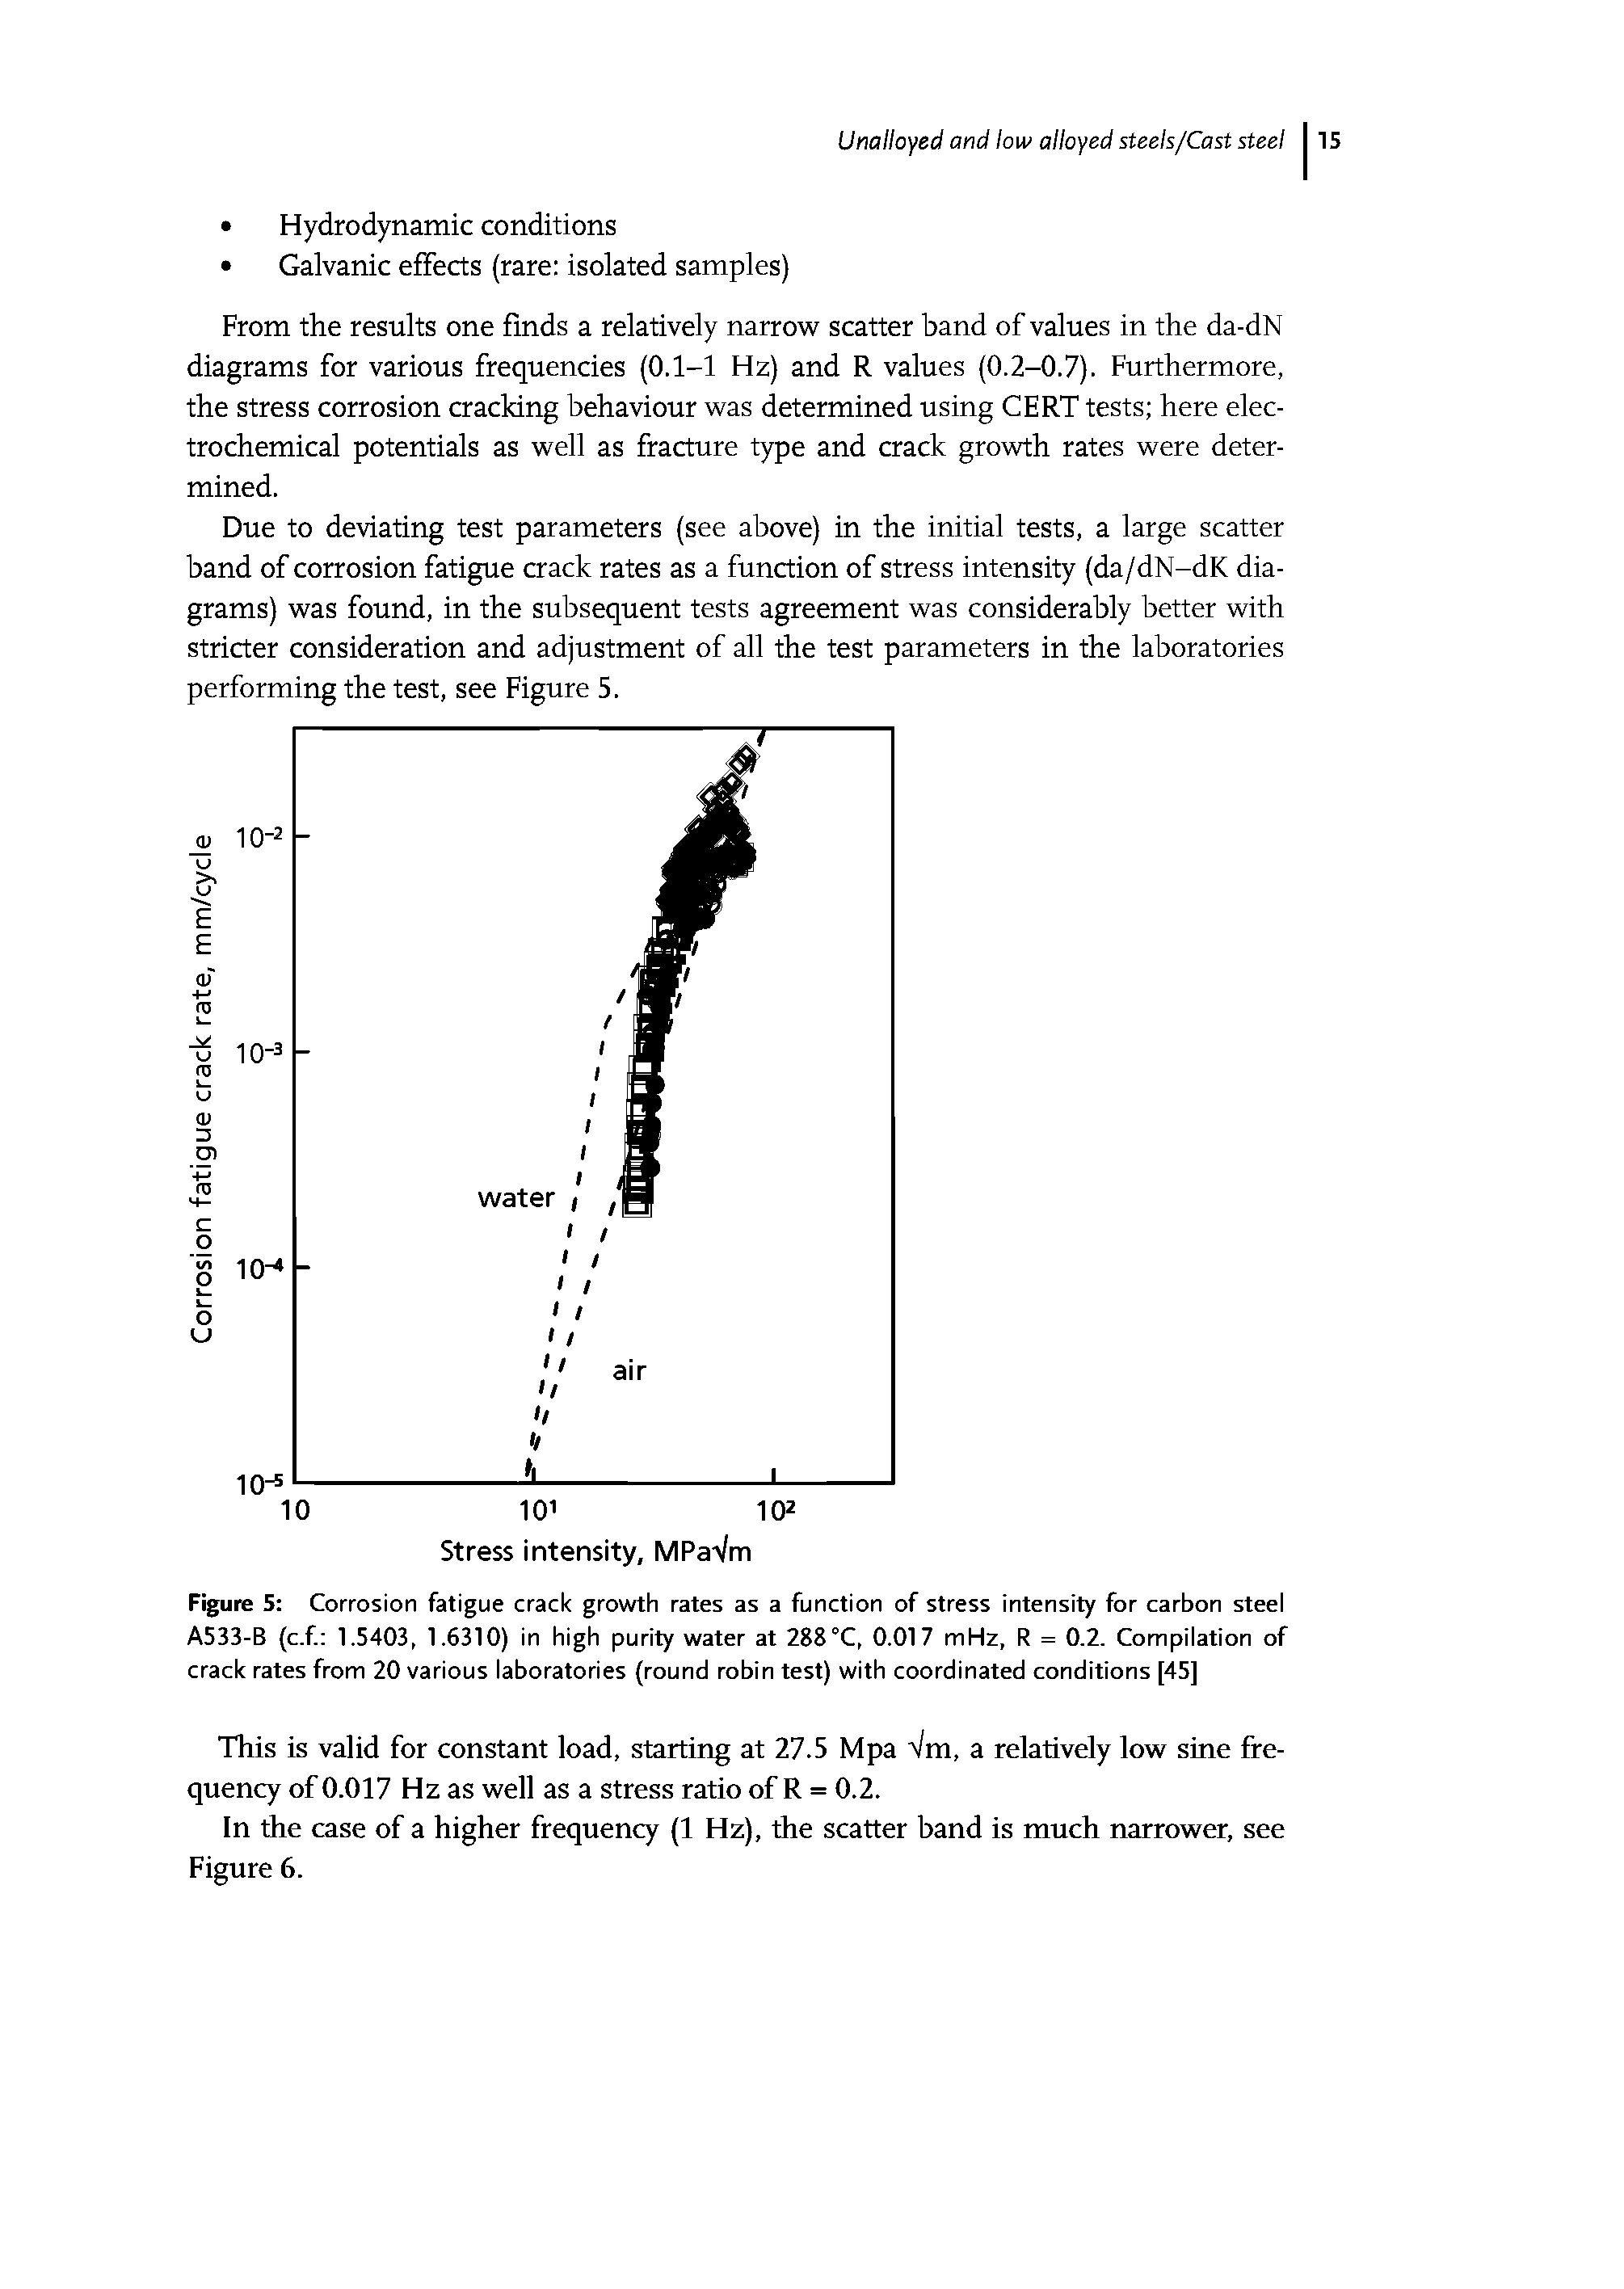 Figure 5 Corrosion fatigue crack growth rates as a function of stress intensity for carbon steel A533-B (c.f 1.5403, 1.6310) in high purity water at 288°C, 0.017 mHz, R = 0.2. Compilation of crack rates from 20 various laboratories (round robin test) with coordinated conditions [45]...